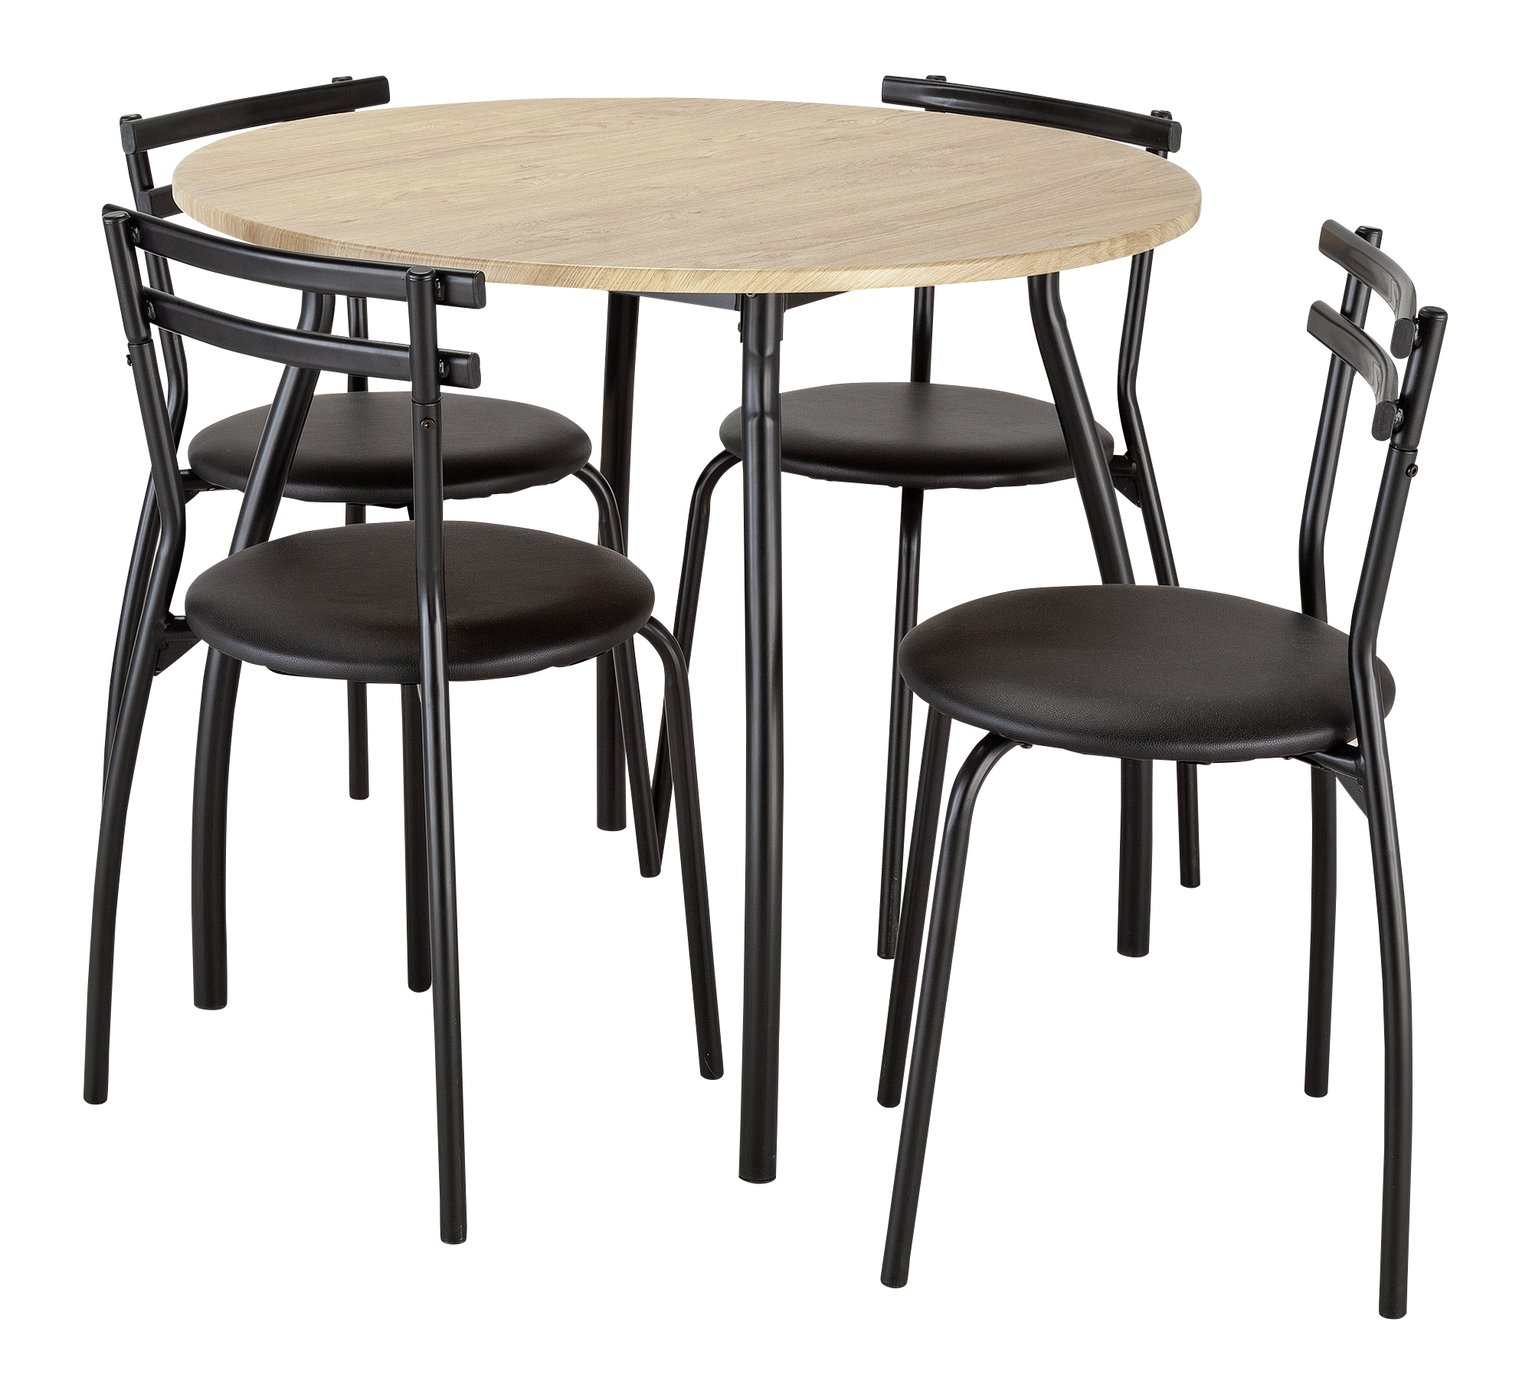 Argos Home Leon Wood Effect Dining Table & 4 Black Chairs